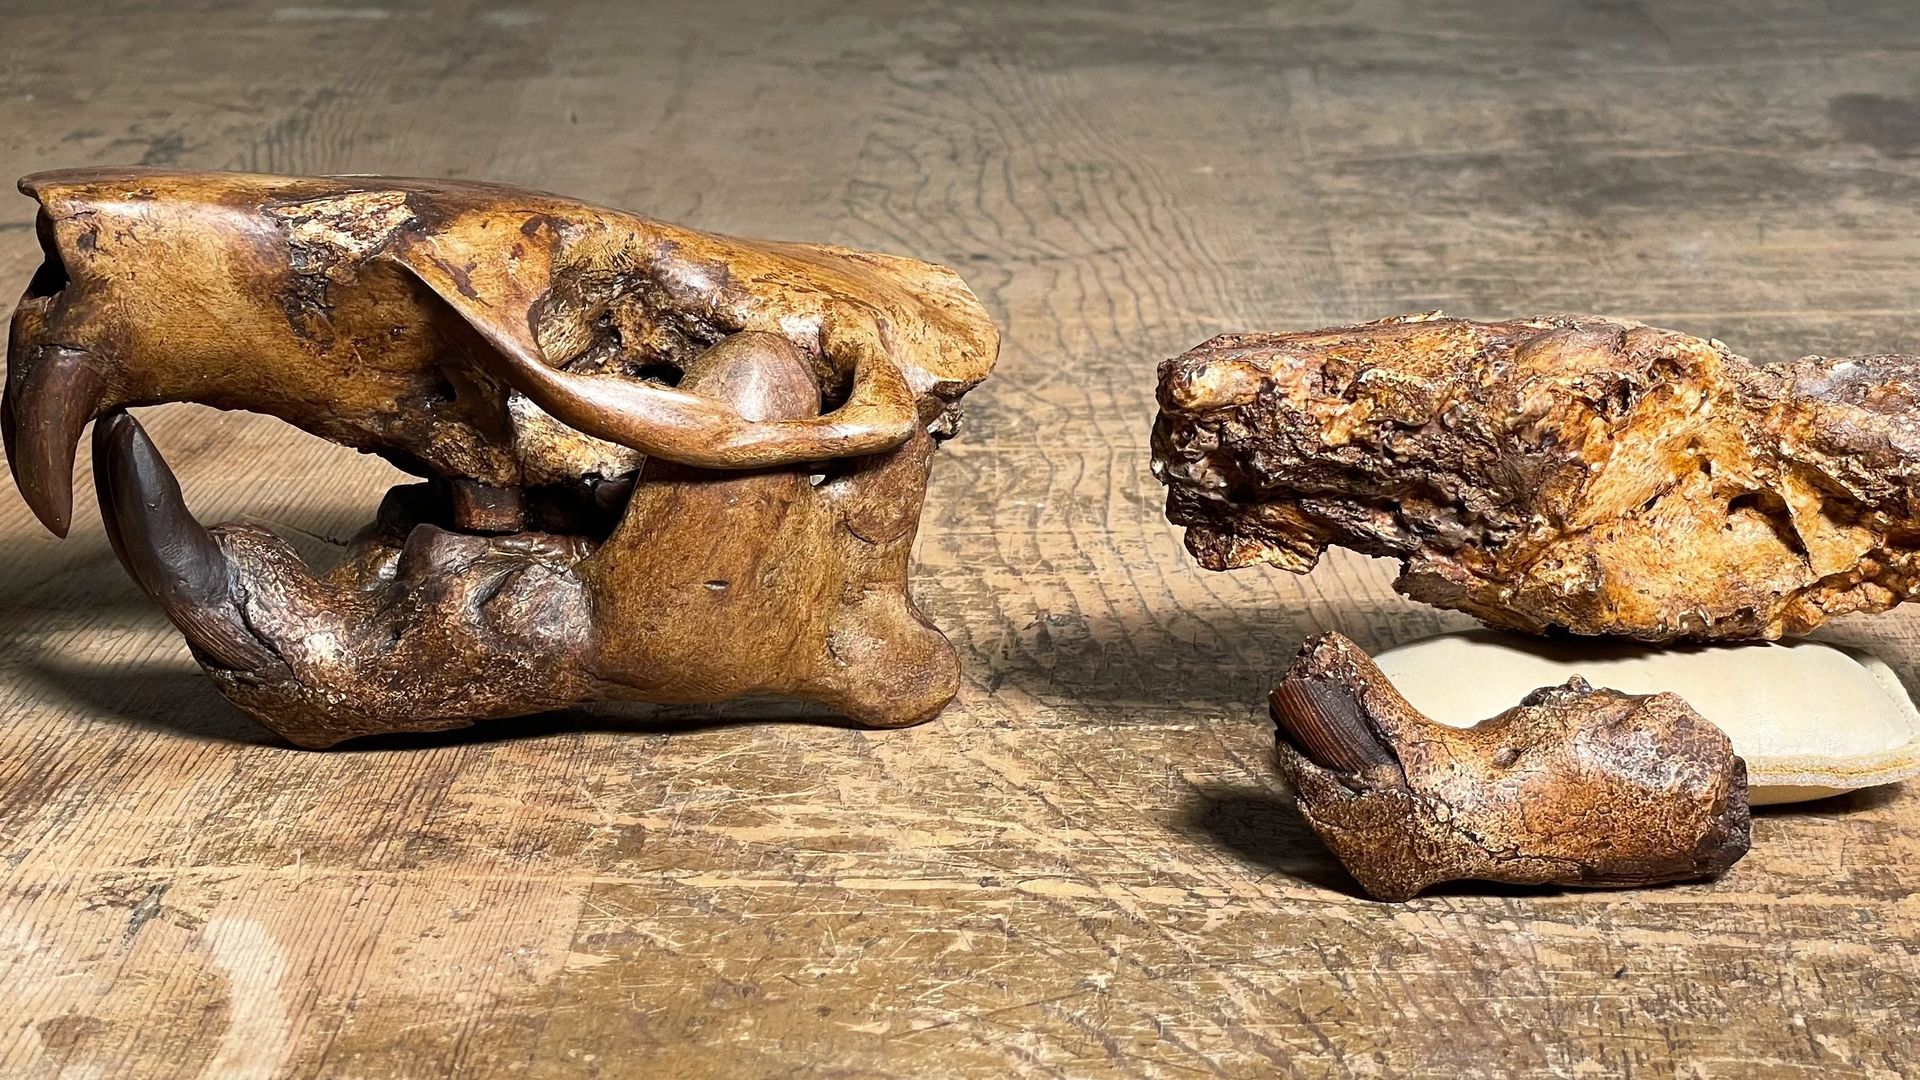 A partial skull fossil from the ancient beaver Anchitheriomys buceei (on right) alongside a skull reconstruction. Photo: UT Austin / Jackson School of Geosciences / Matthew Brown